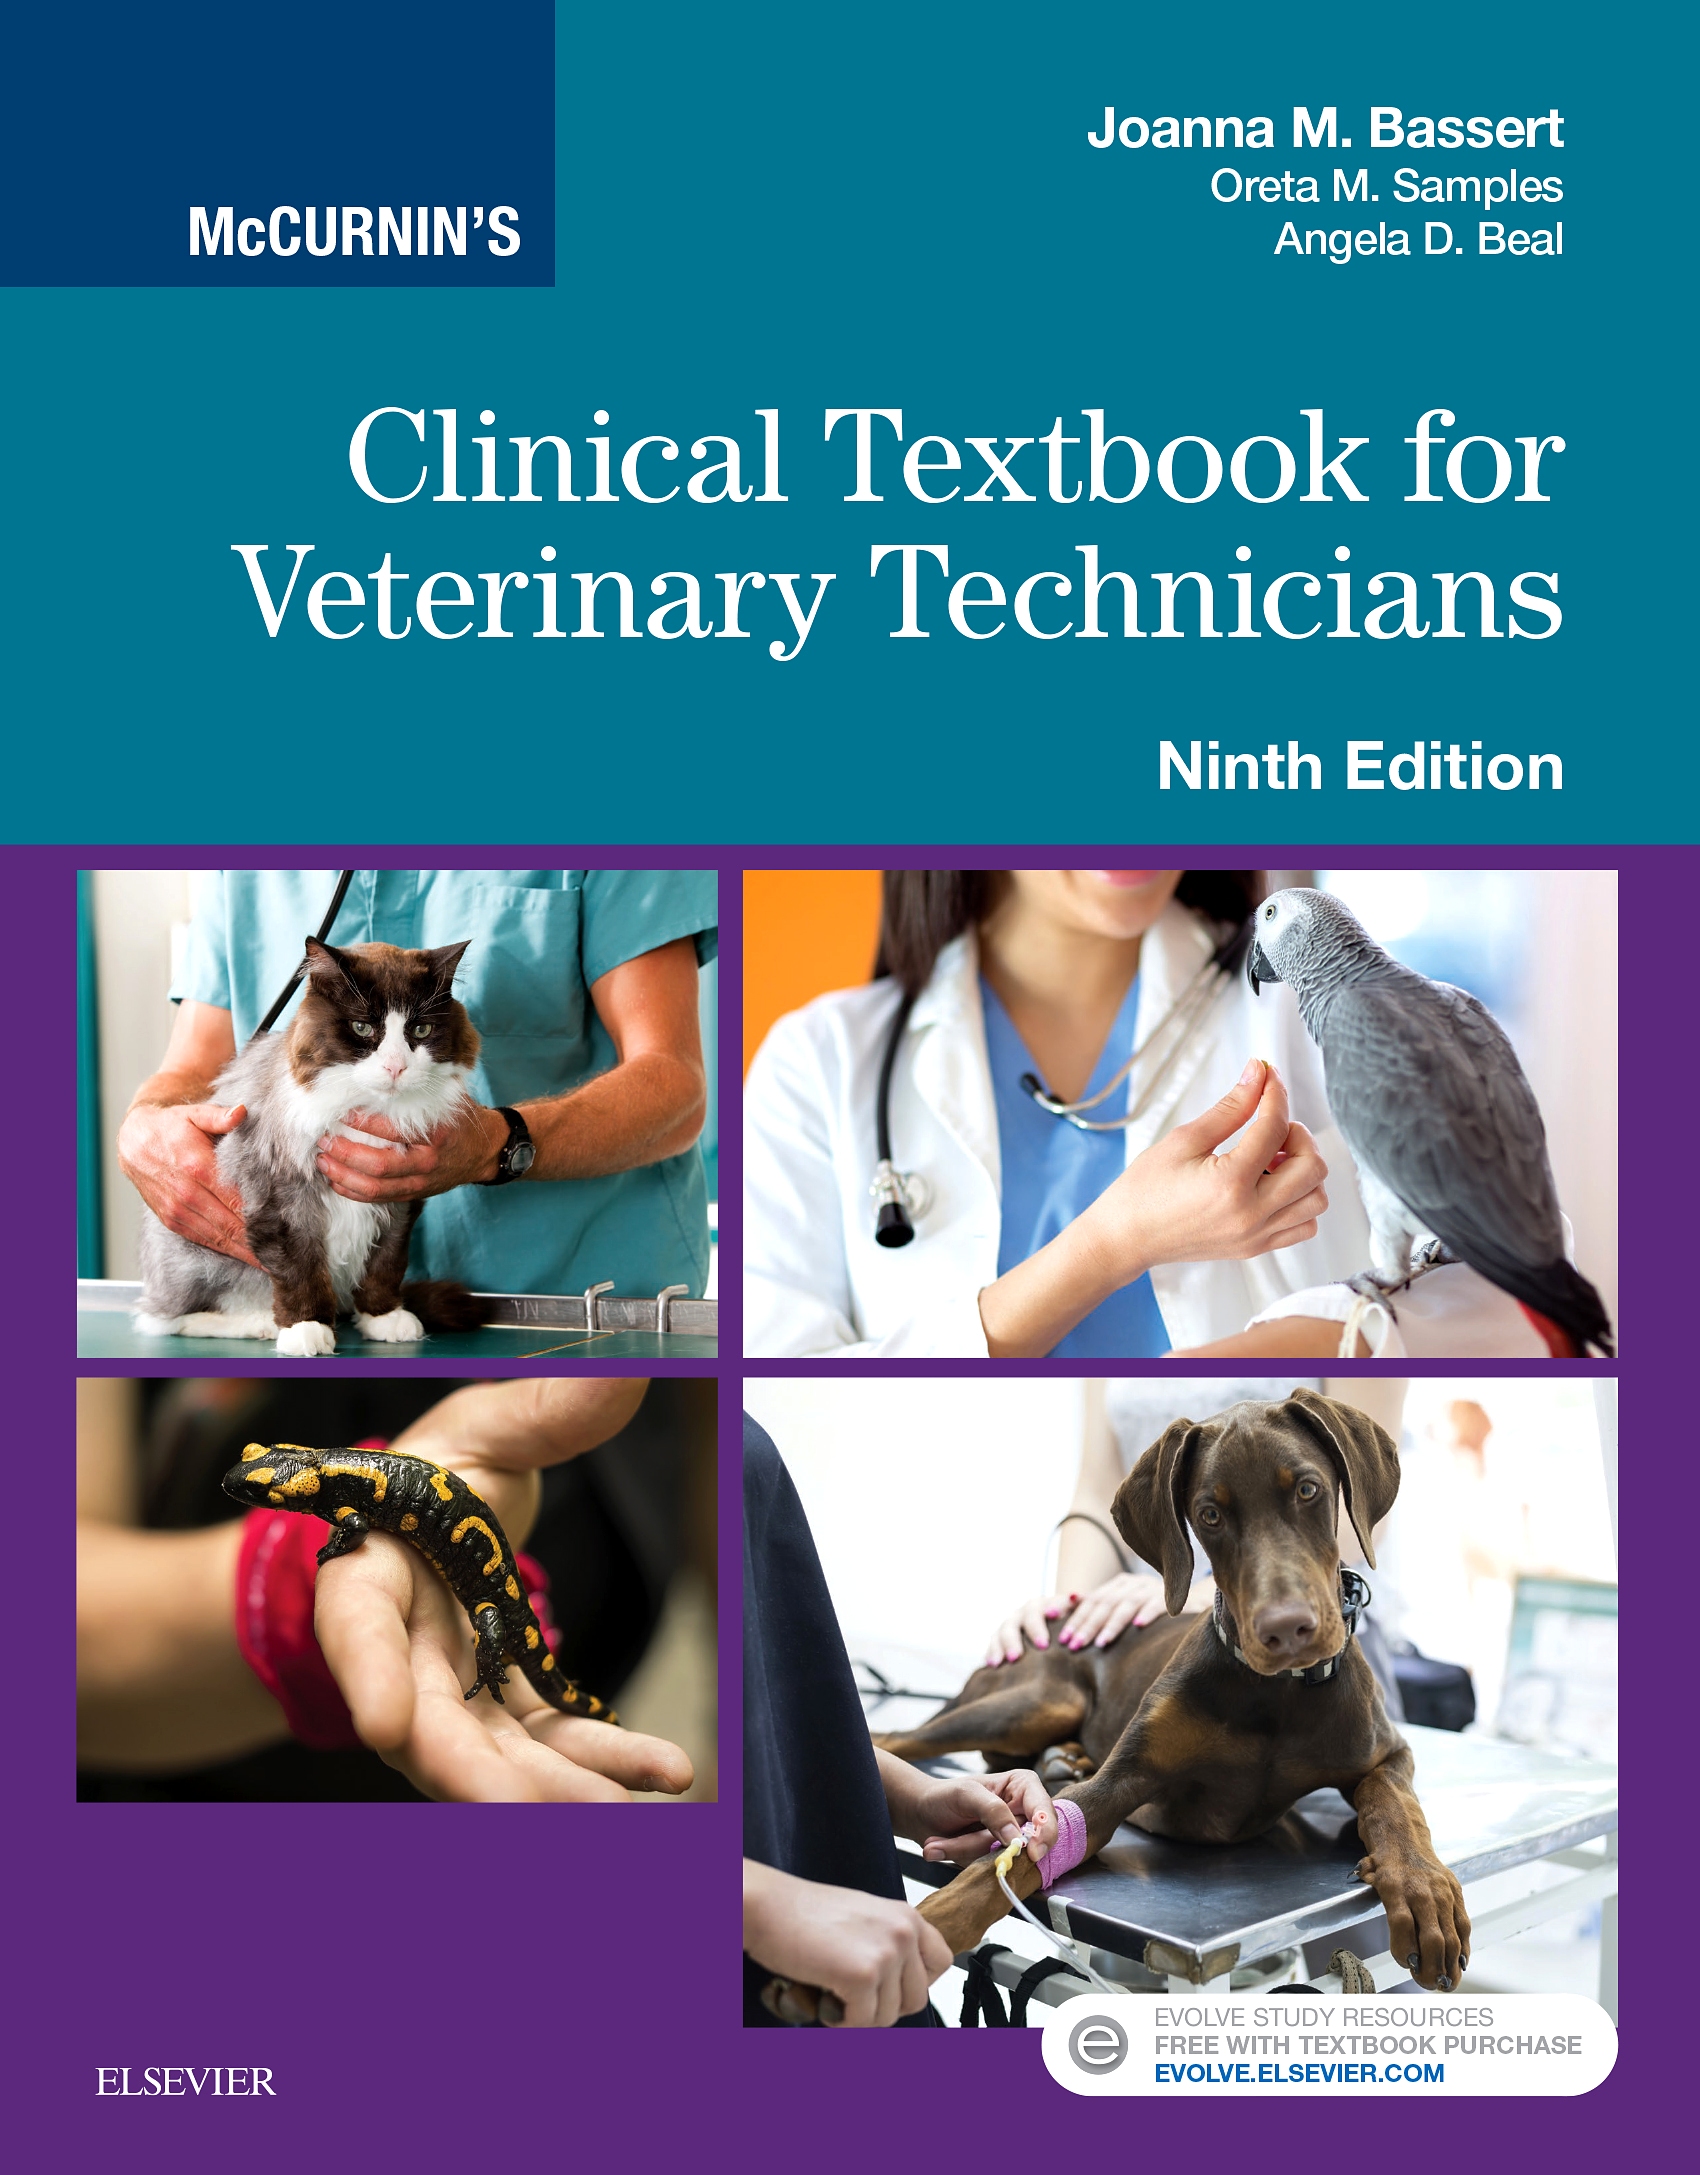 Evolve Resources for McCurnin's Clinical Textbook for Veterinary Technicians, 9th Edition